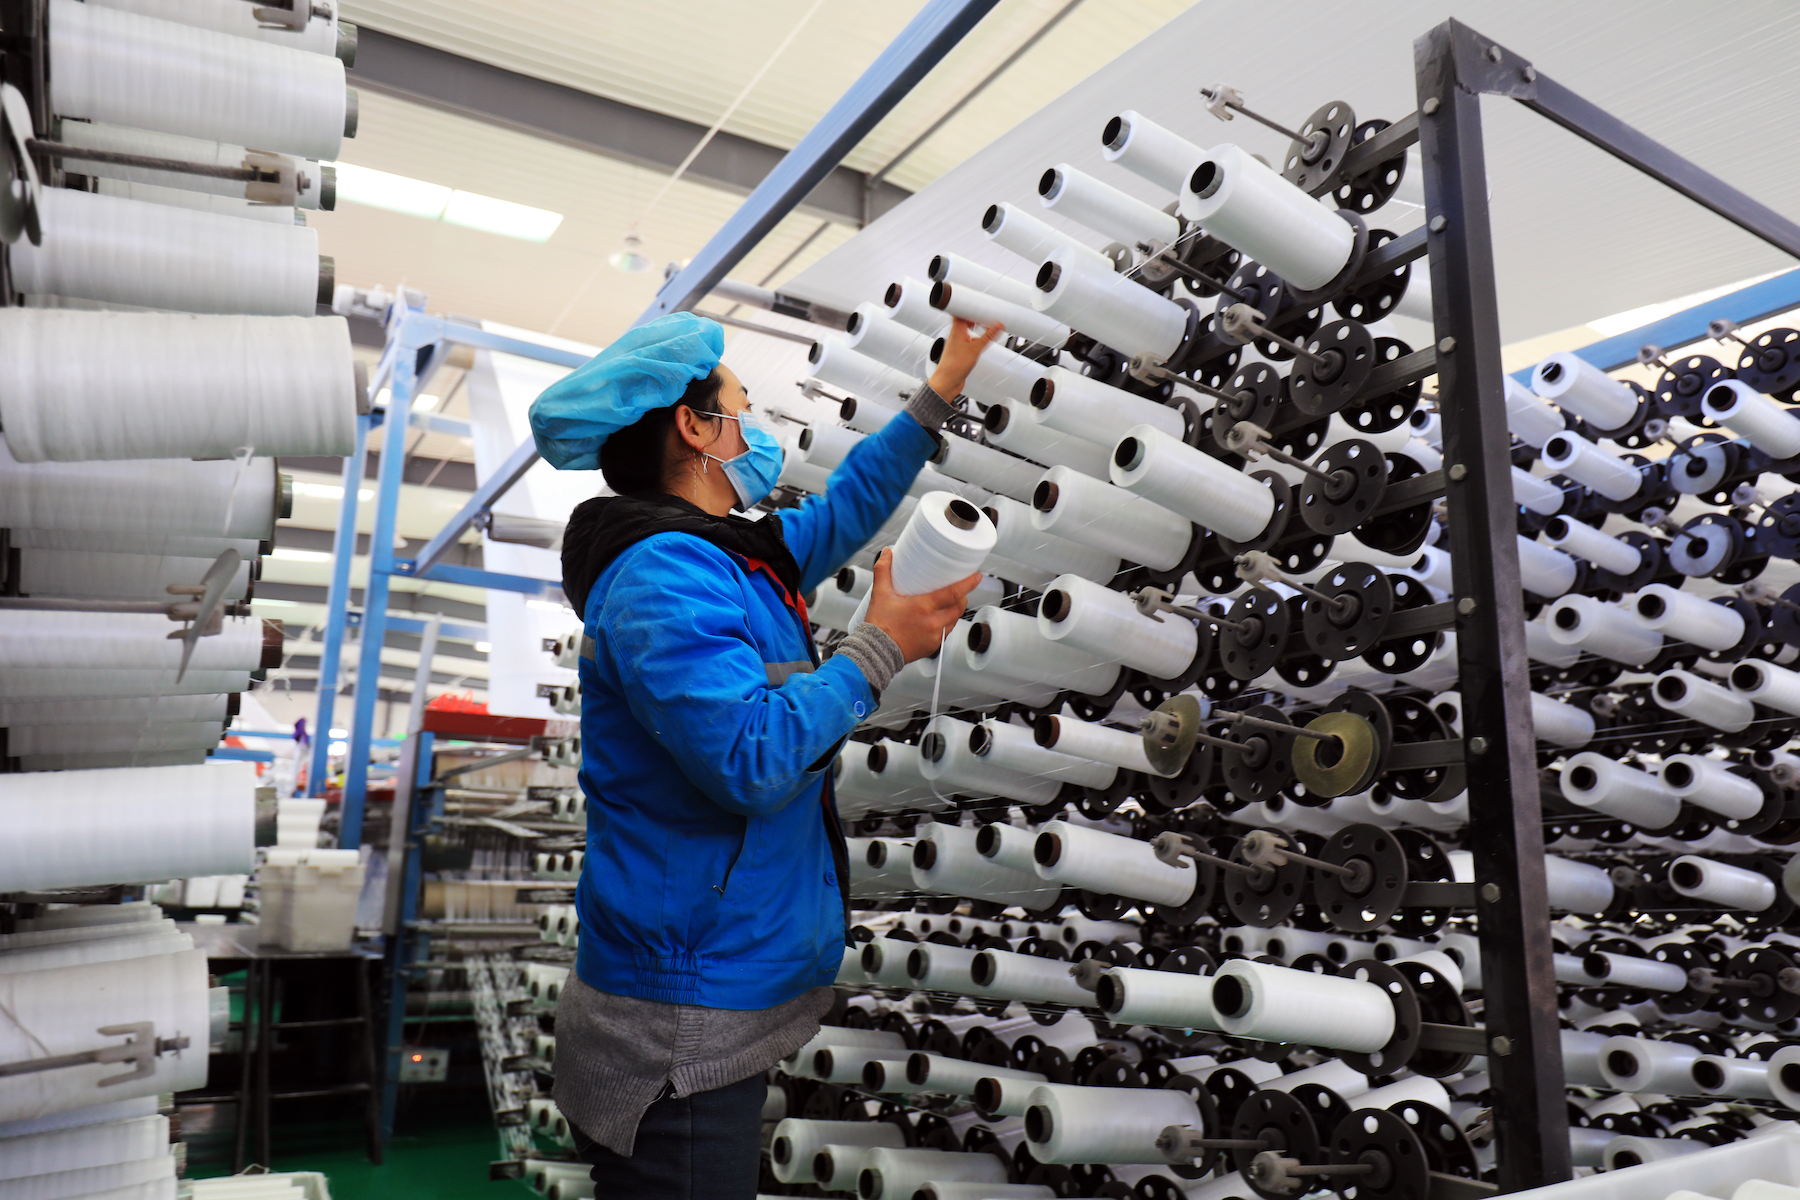 A woman worker loads spools at a textile factory